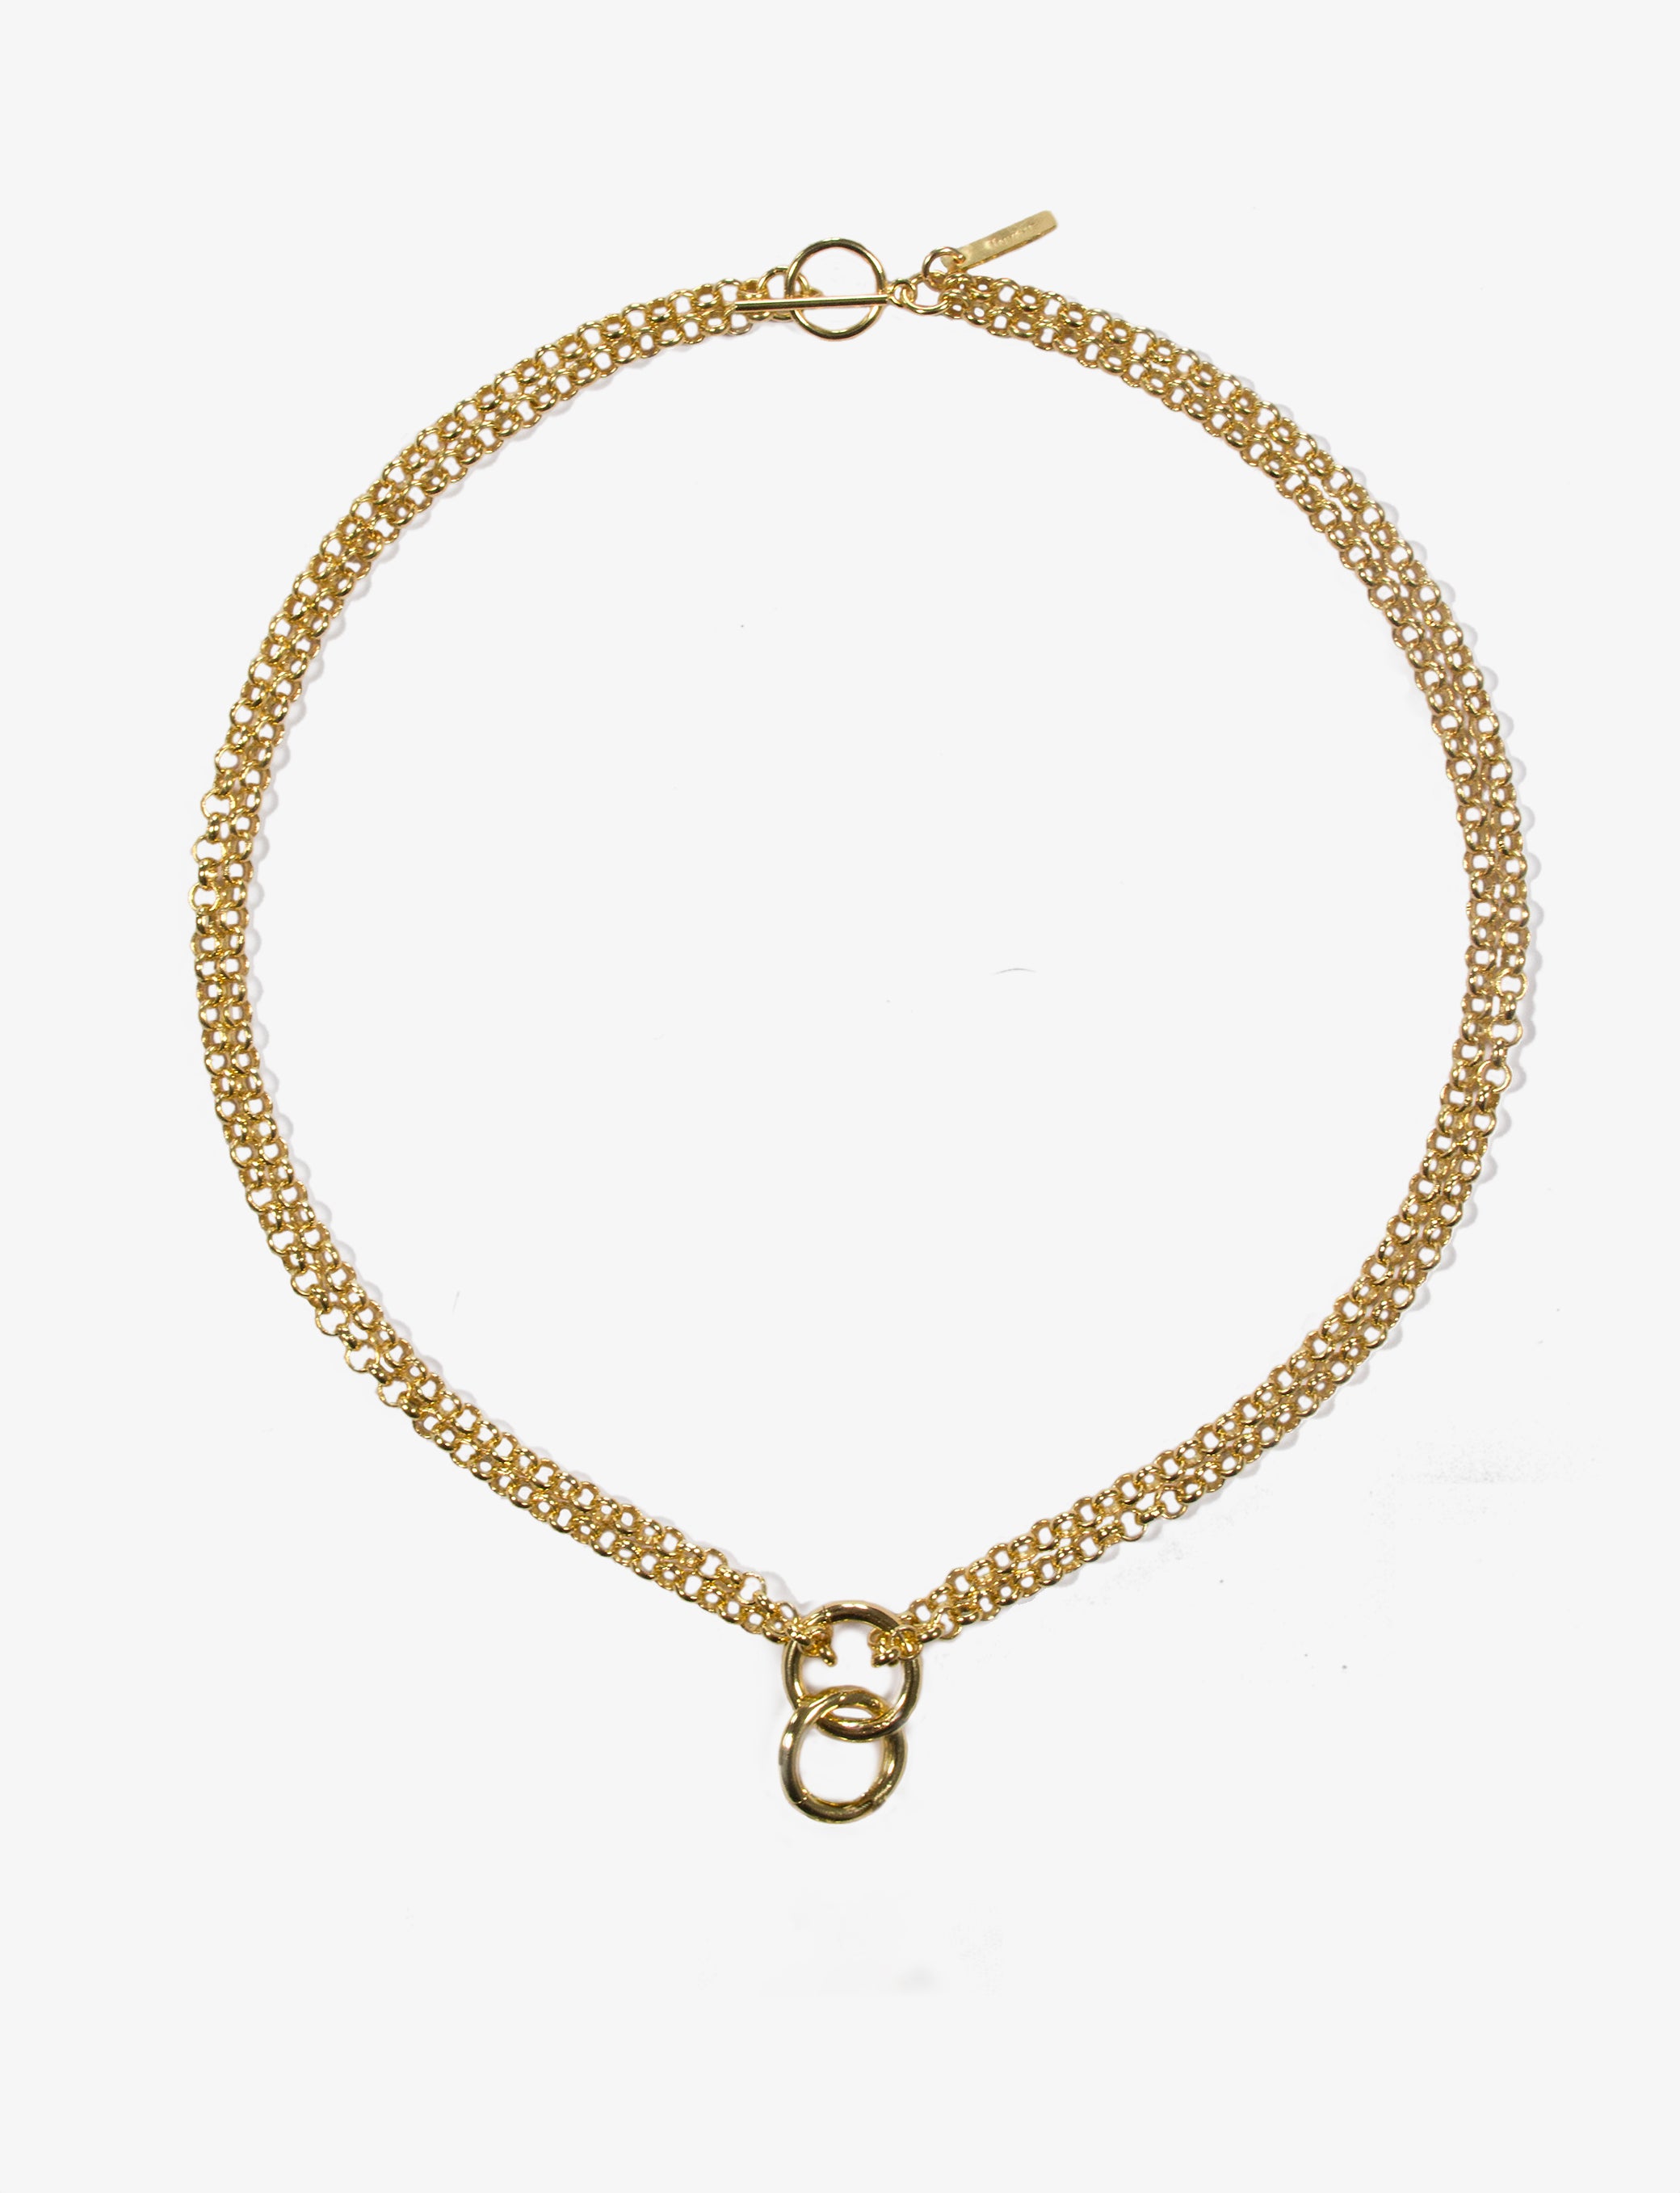 llayers jewelry Women gold chain rings choker necklace - Made In Brookyn New York 3